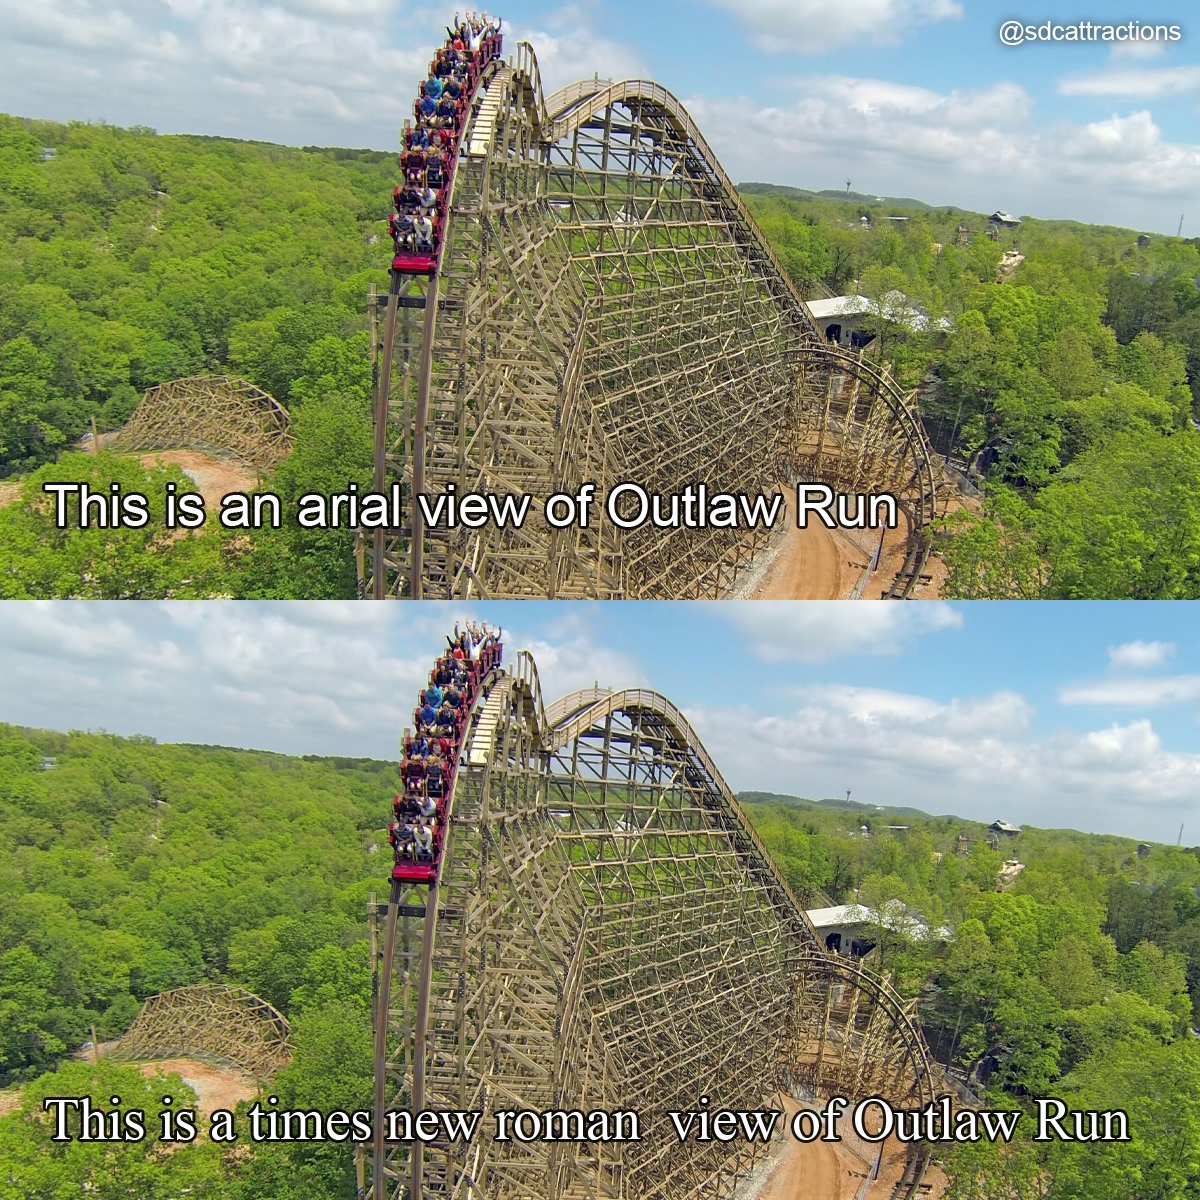 @SDCAttractions @RockyMtnConst @aceonlineorg @VisitMO @ExploreBranson one of my favorite posts